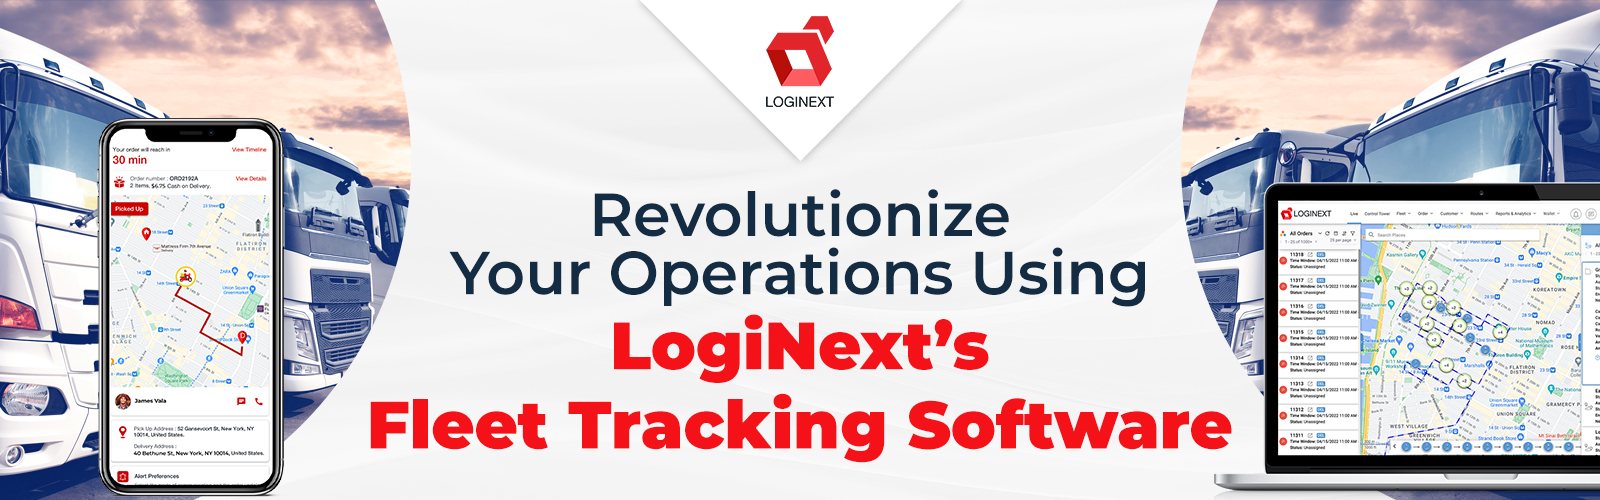 Revolutionize Your Operations Using Fleet Tracking Software